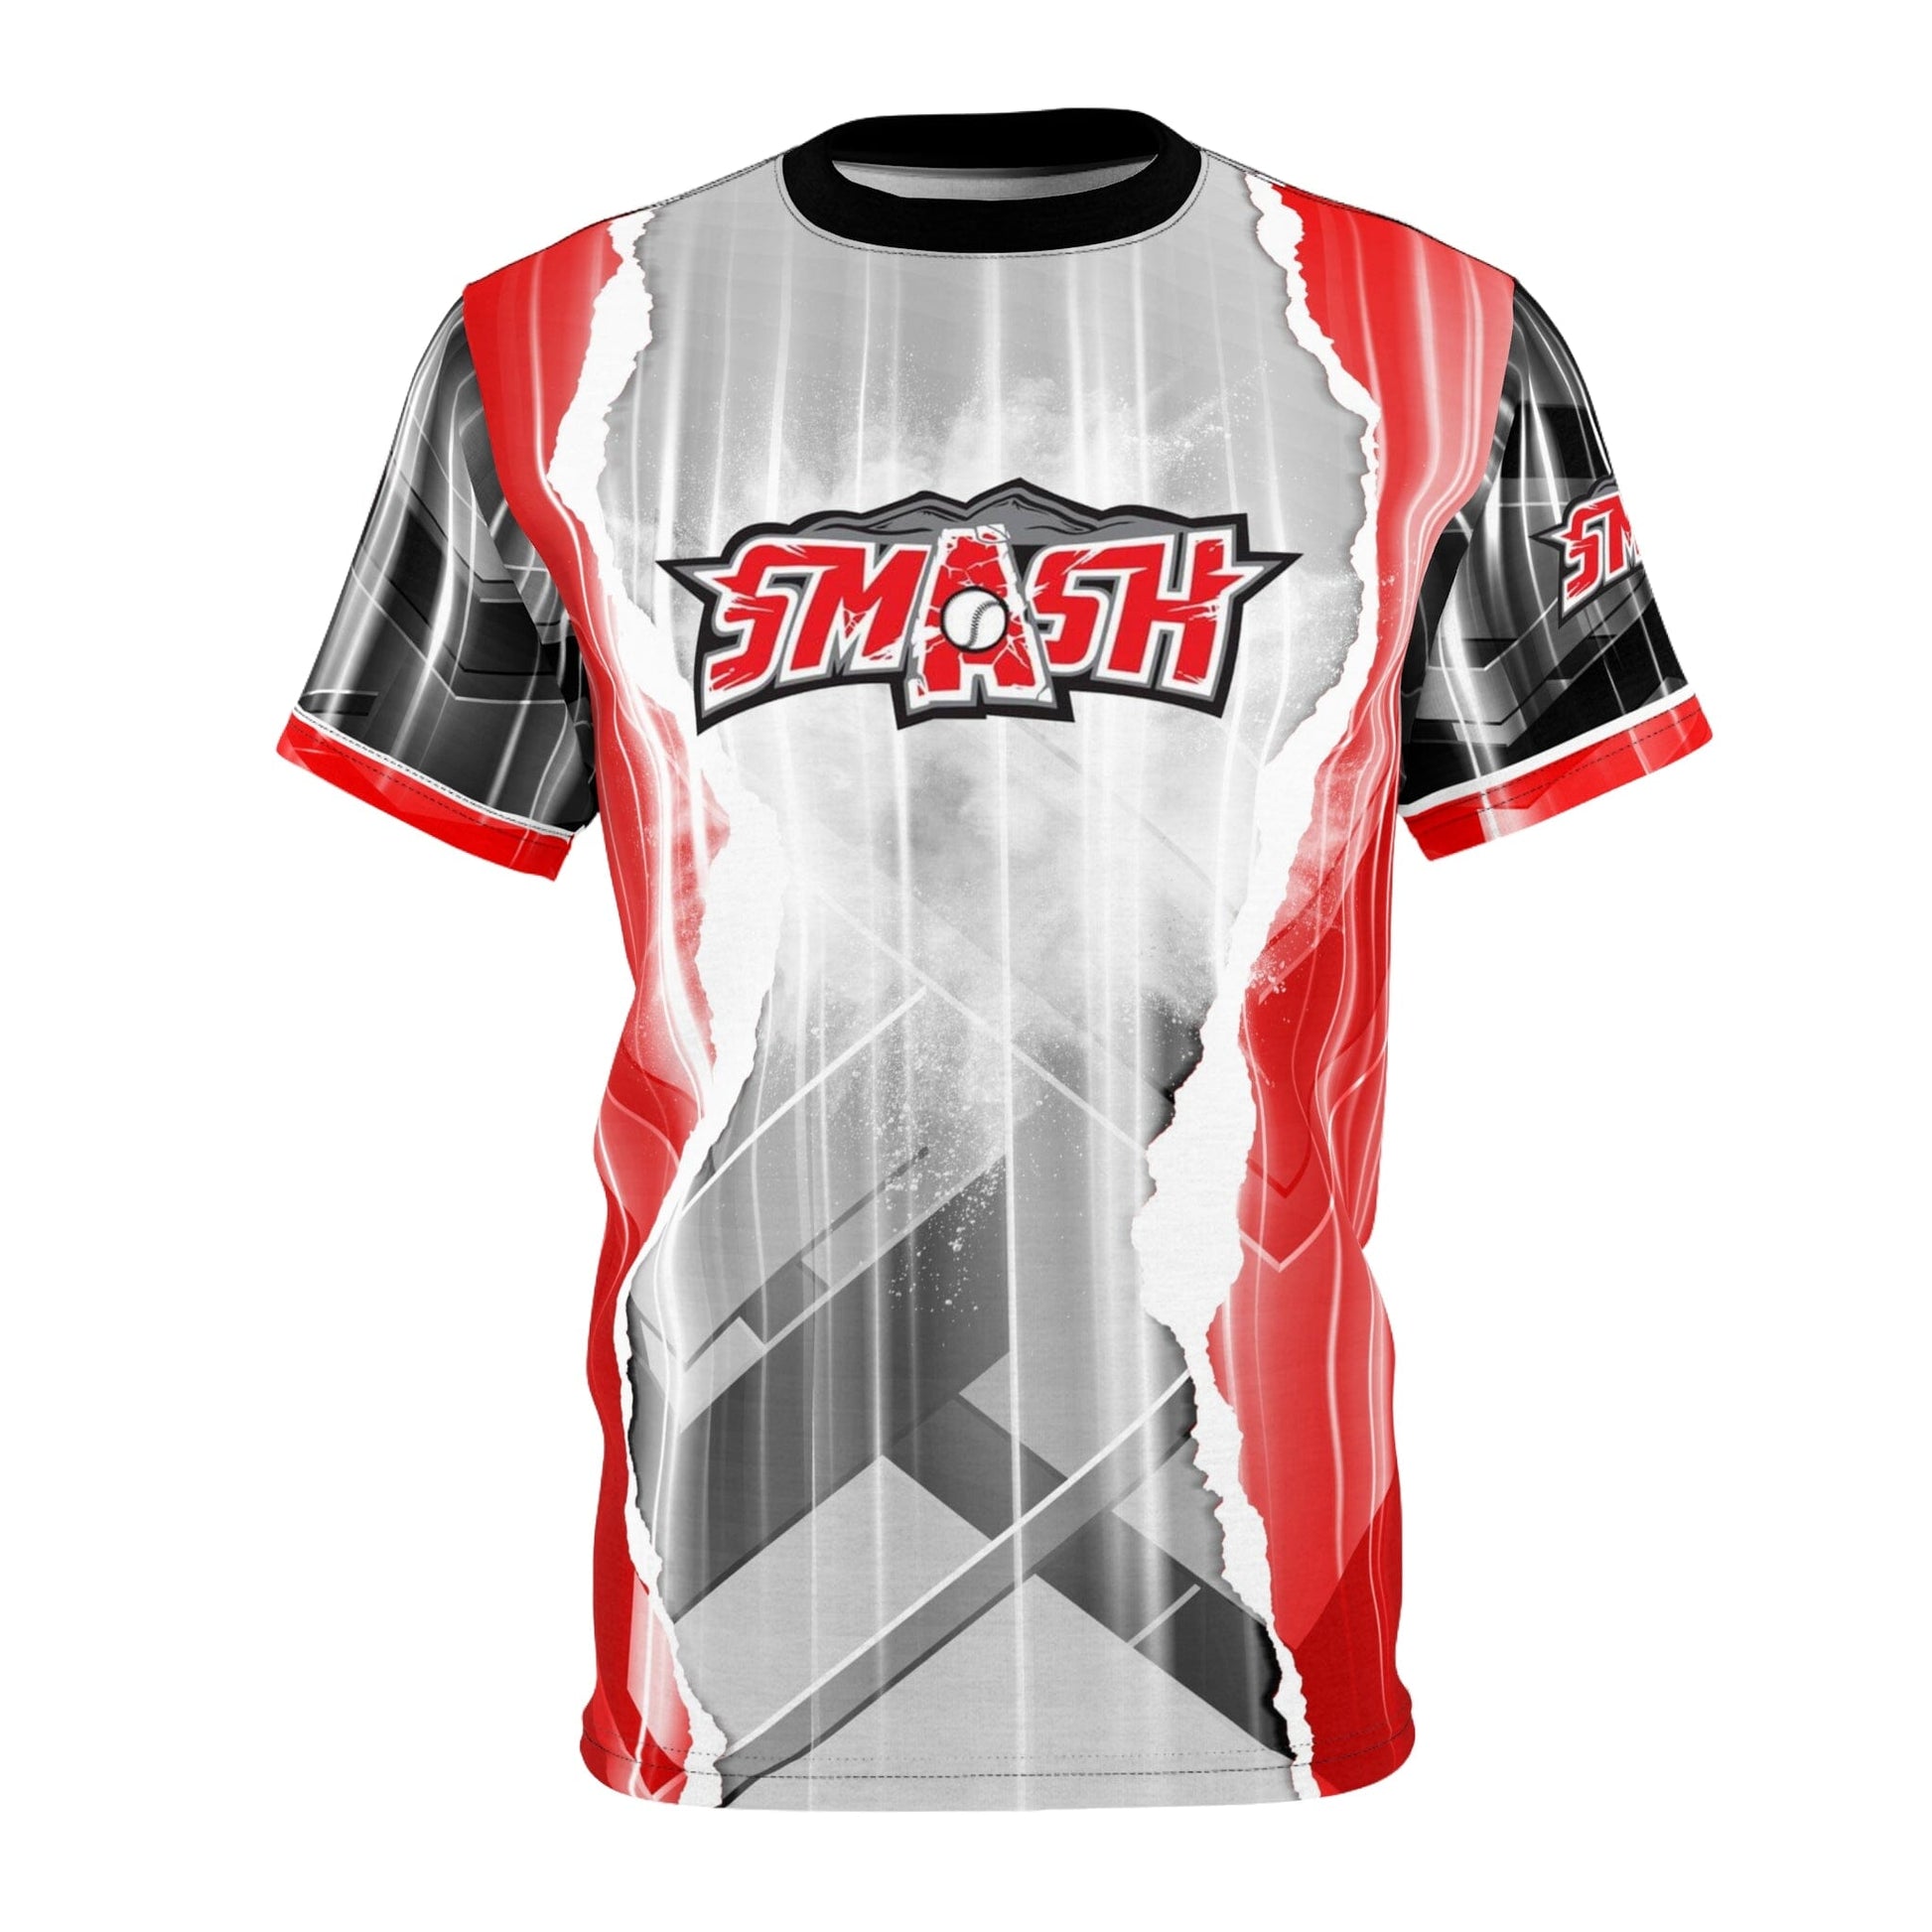 RIPPED - Men's Full Sublimated Sportswear Shirt-Photoshop Template - PSMGraphix